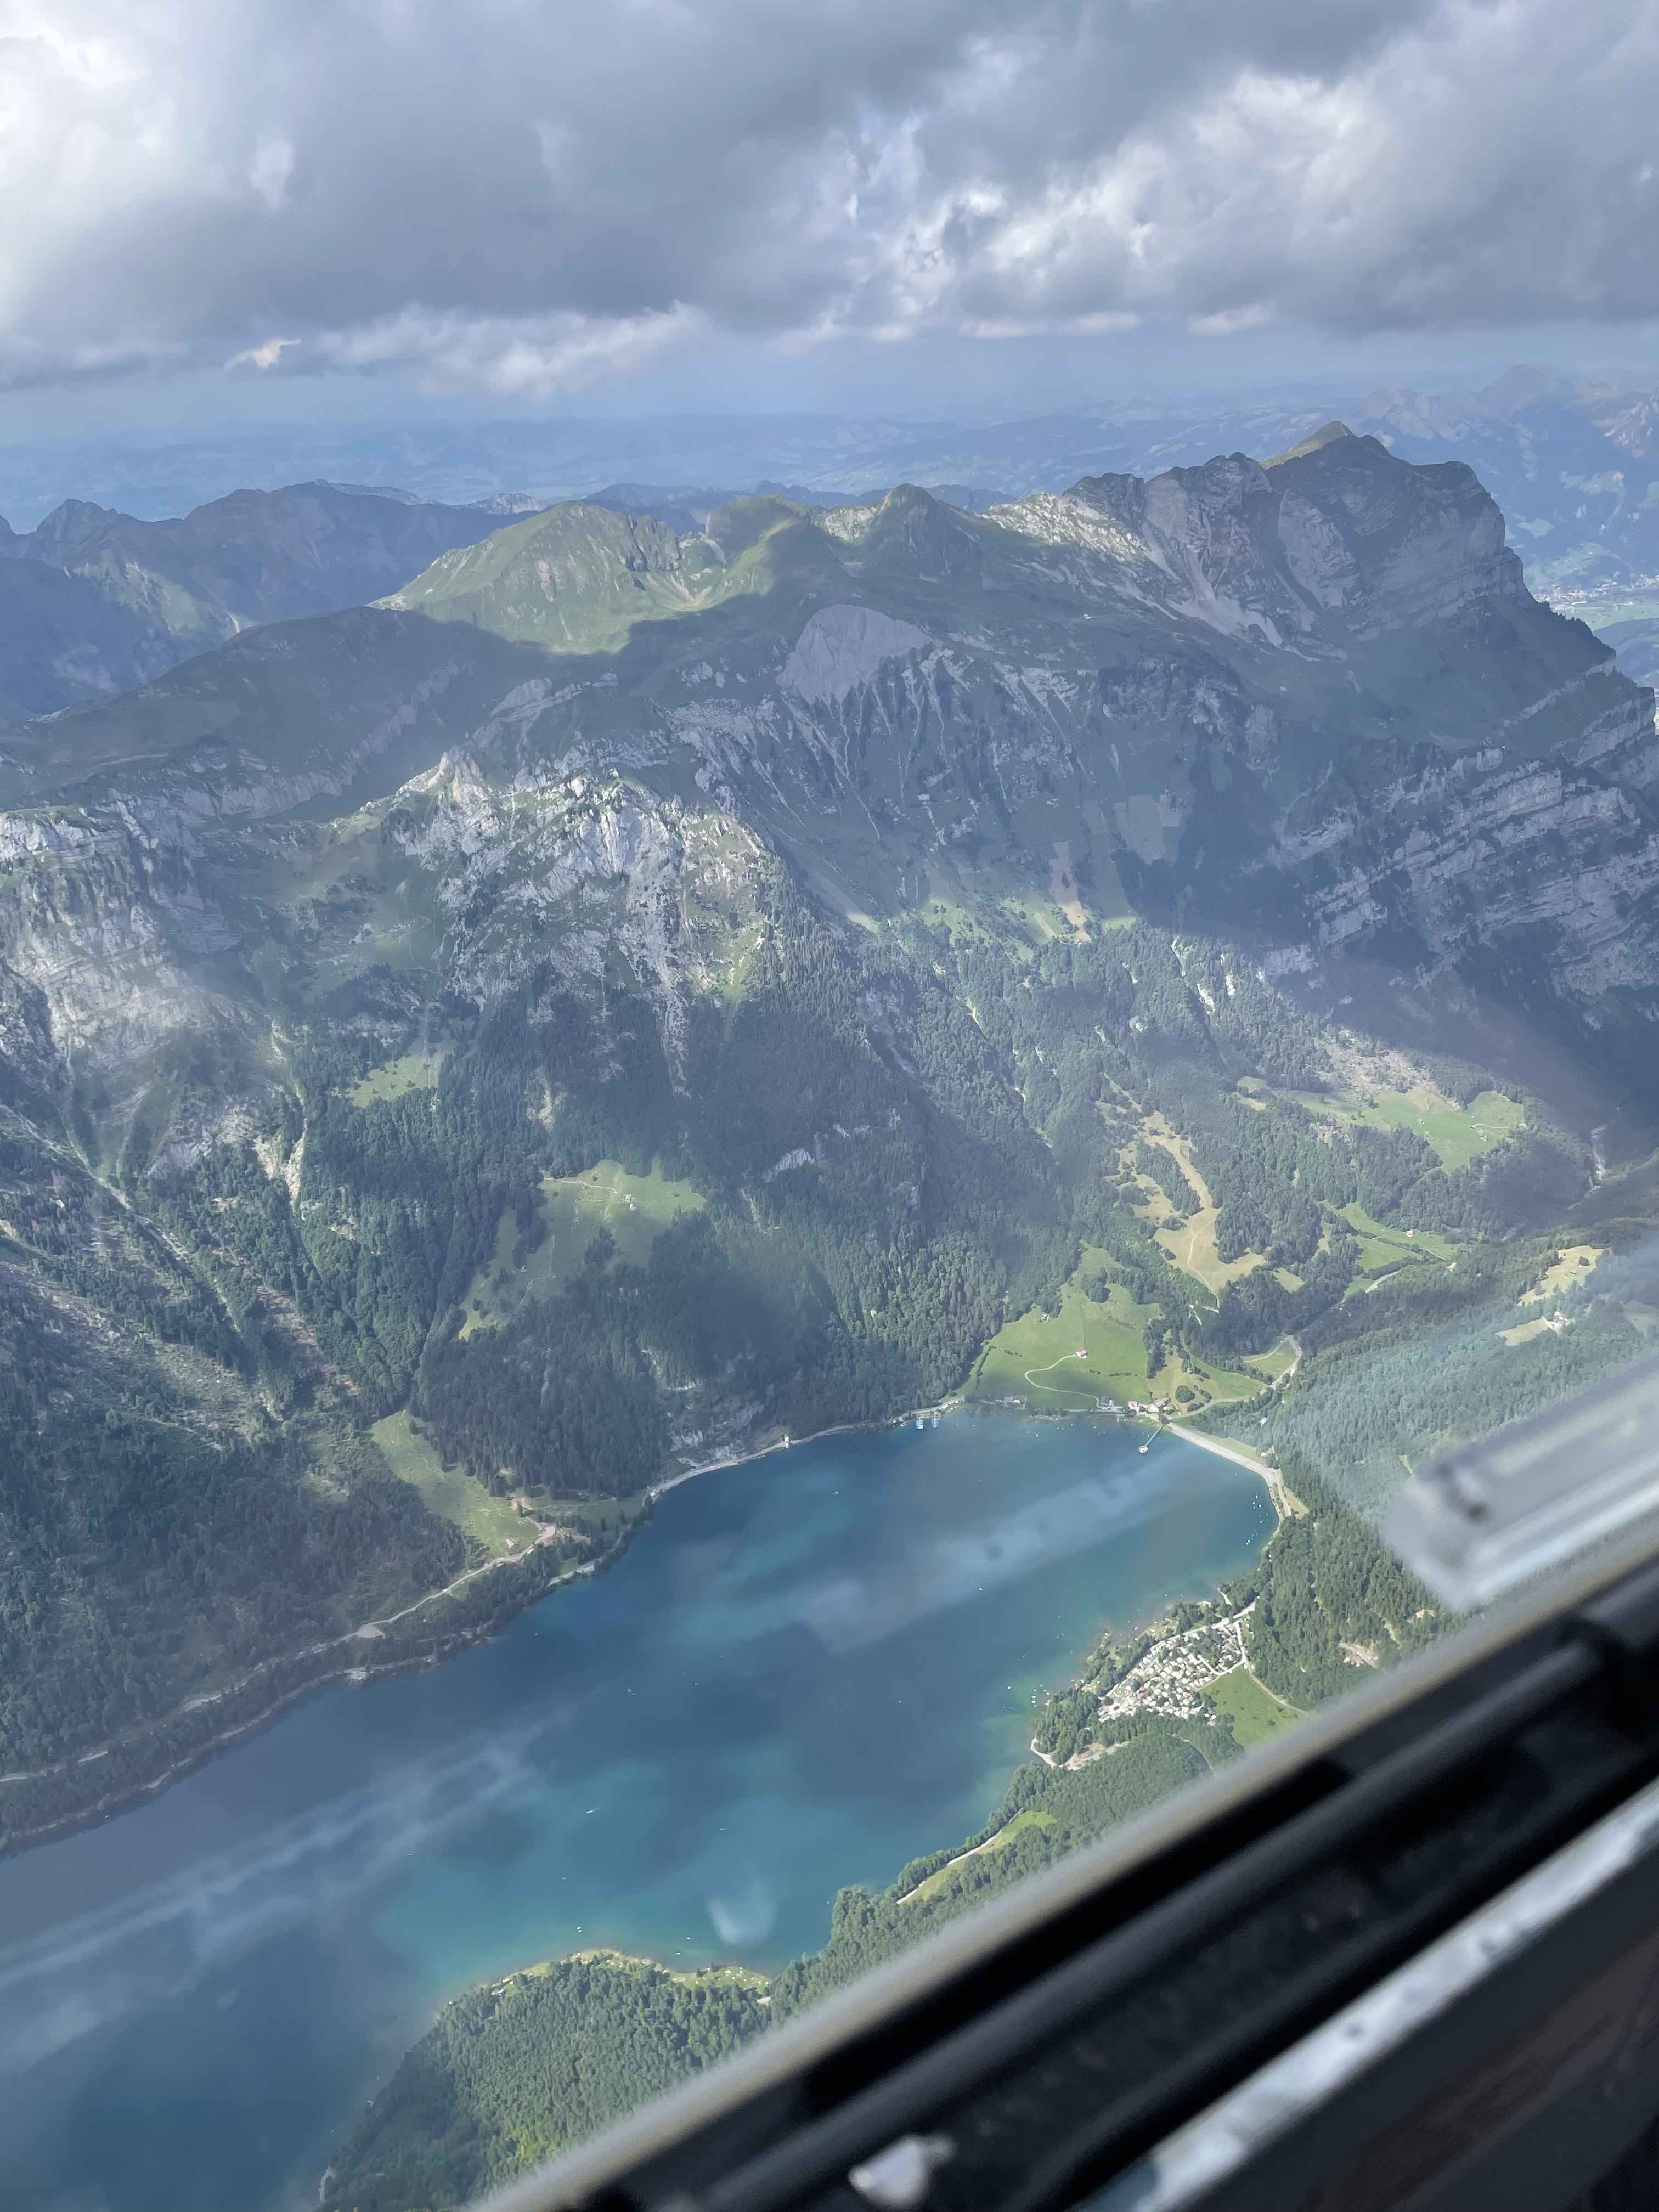 View of Klöntalersee from the glider